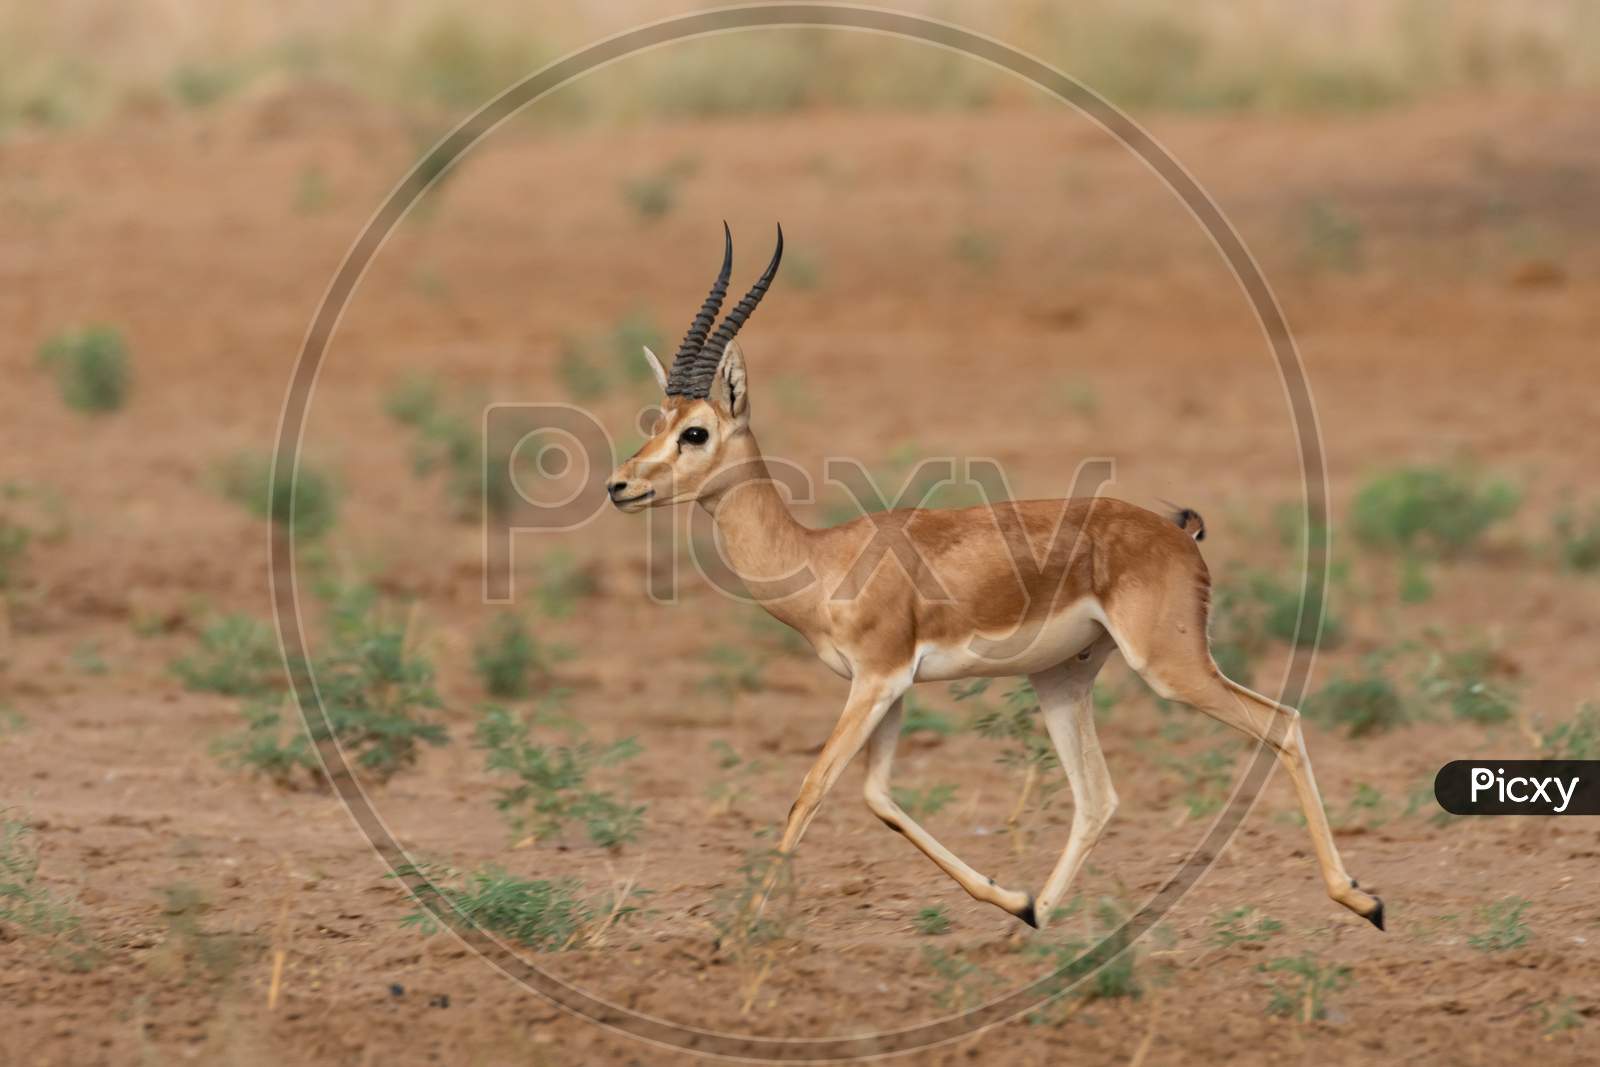 a lone antelope deer, Indian gazelle also known as chinkara